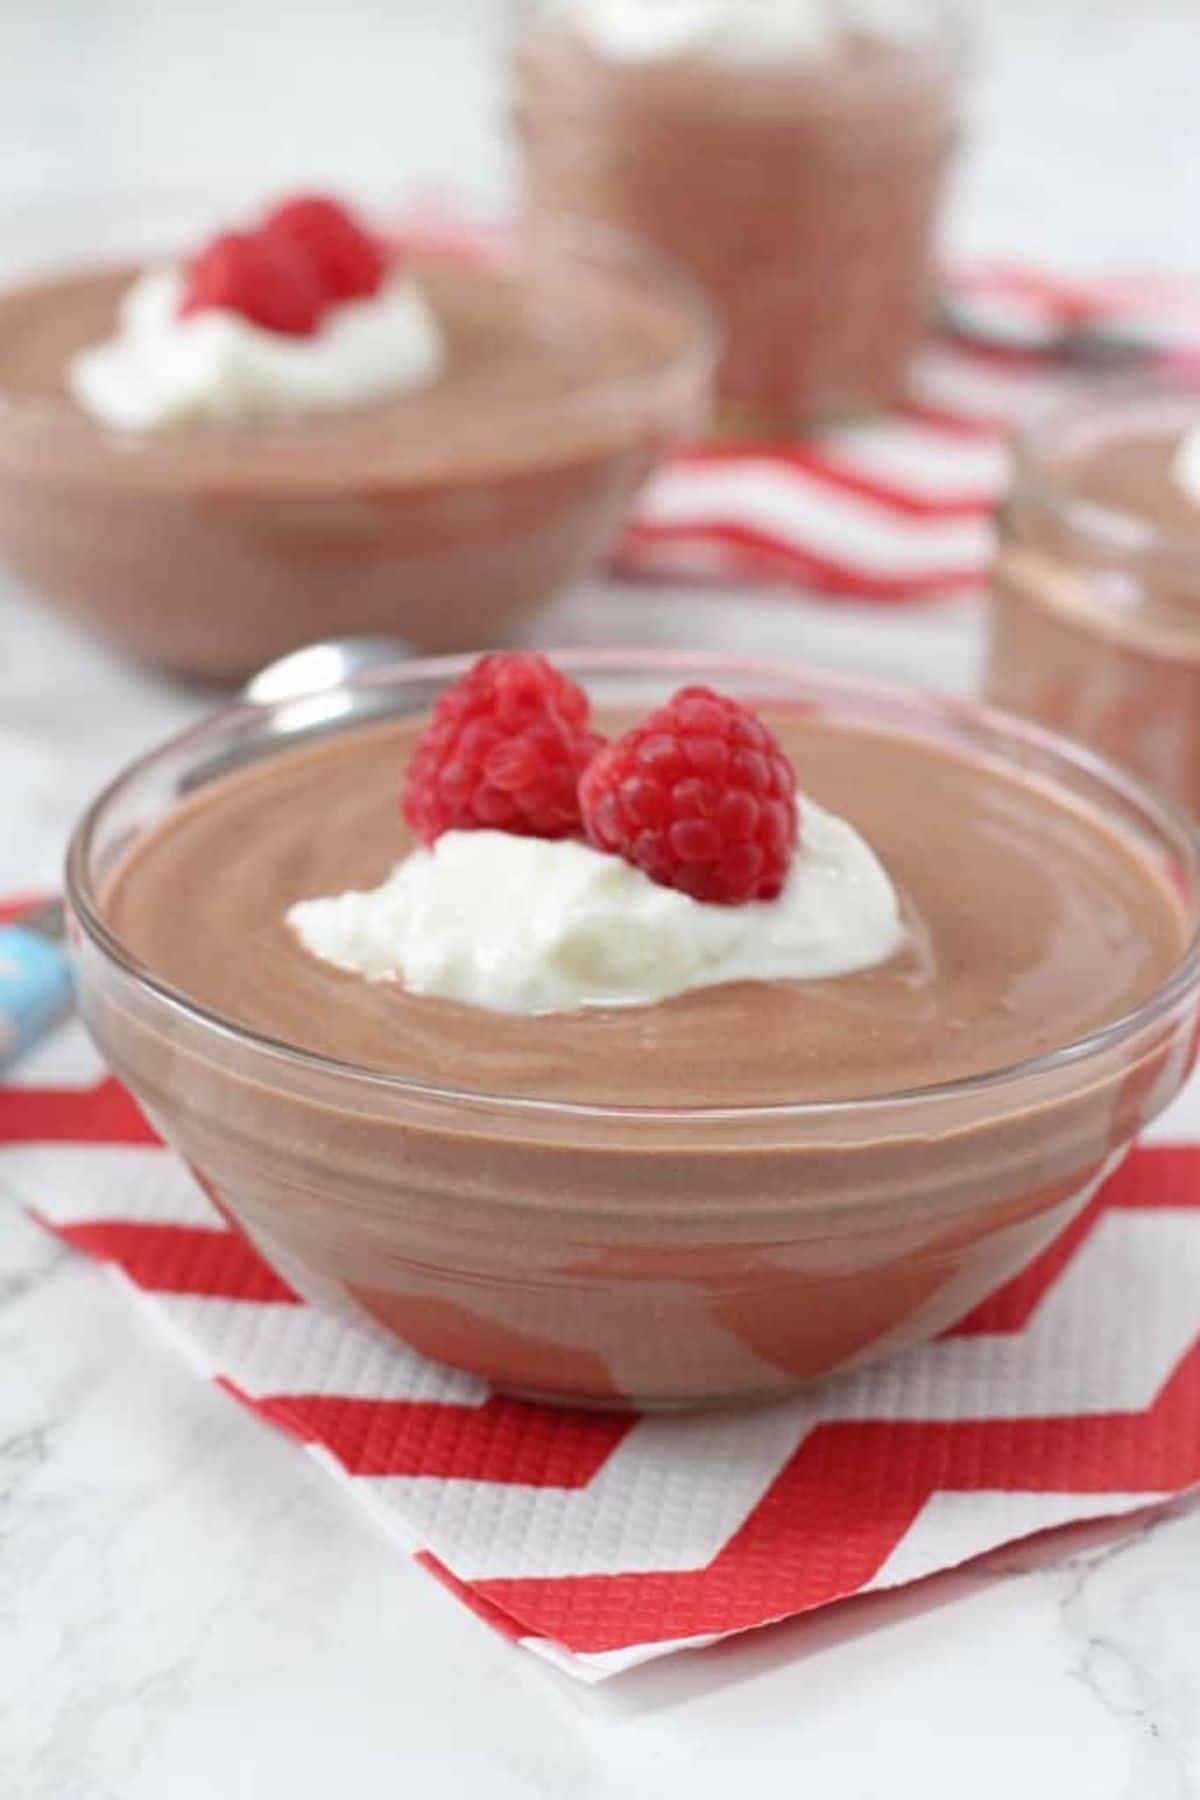 Small glass bowl of chocolate mousse with whipped cream and berry on top